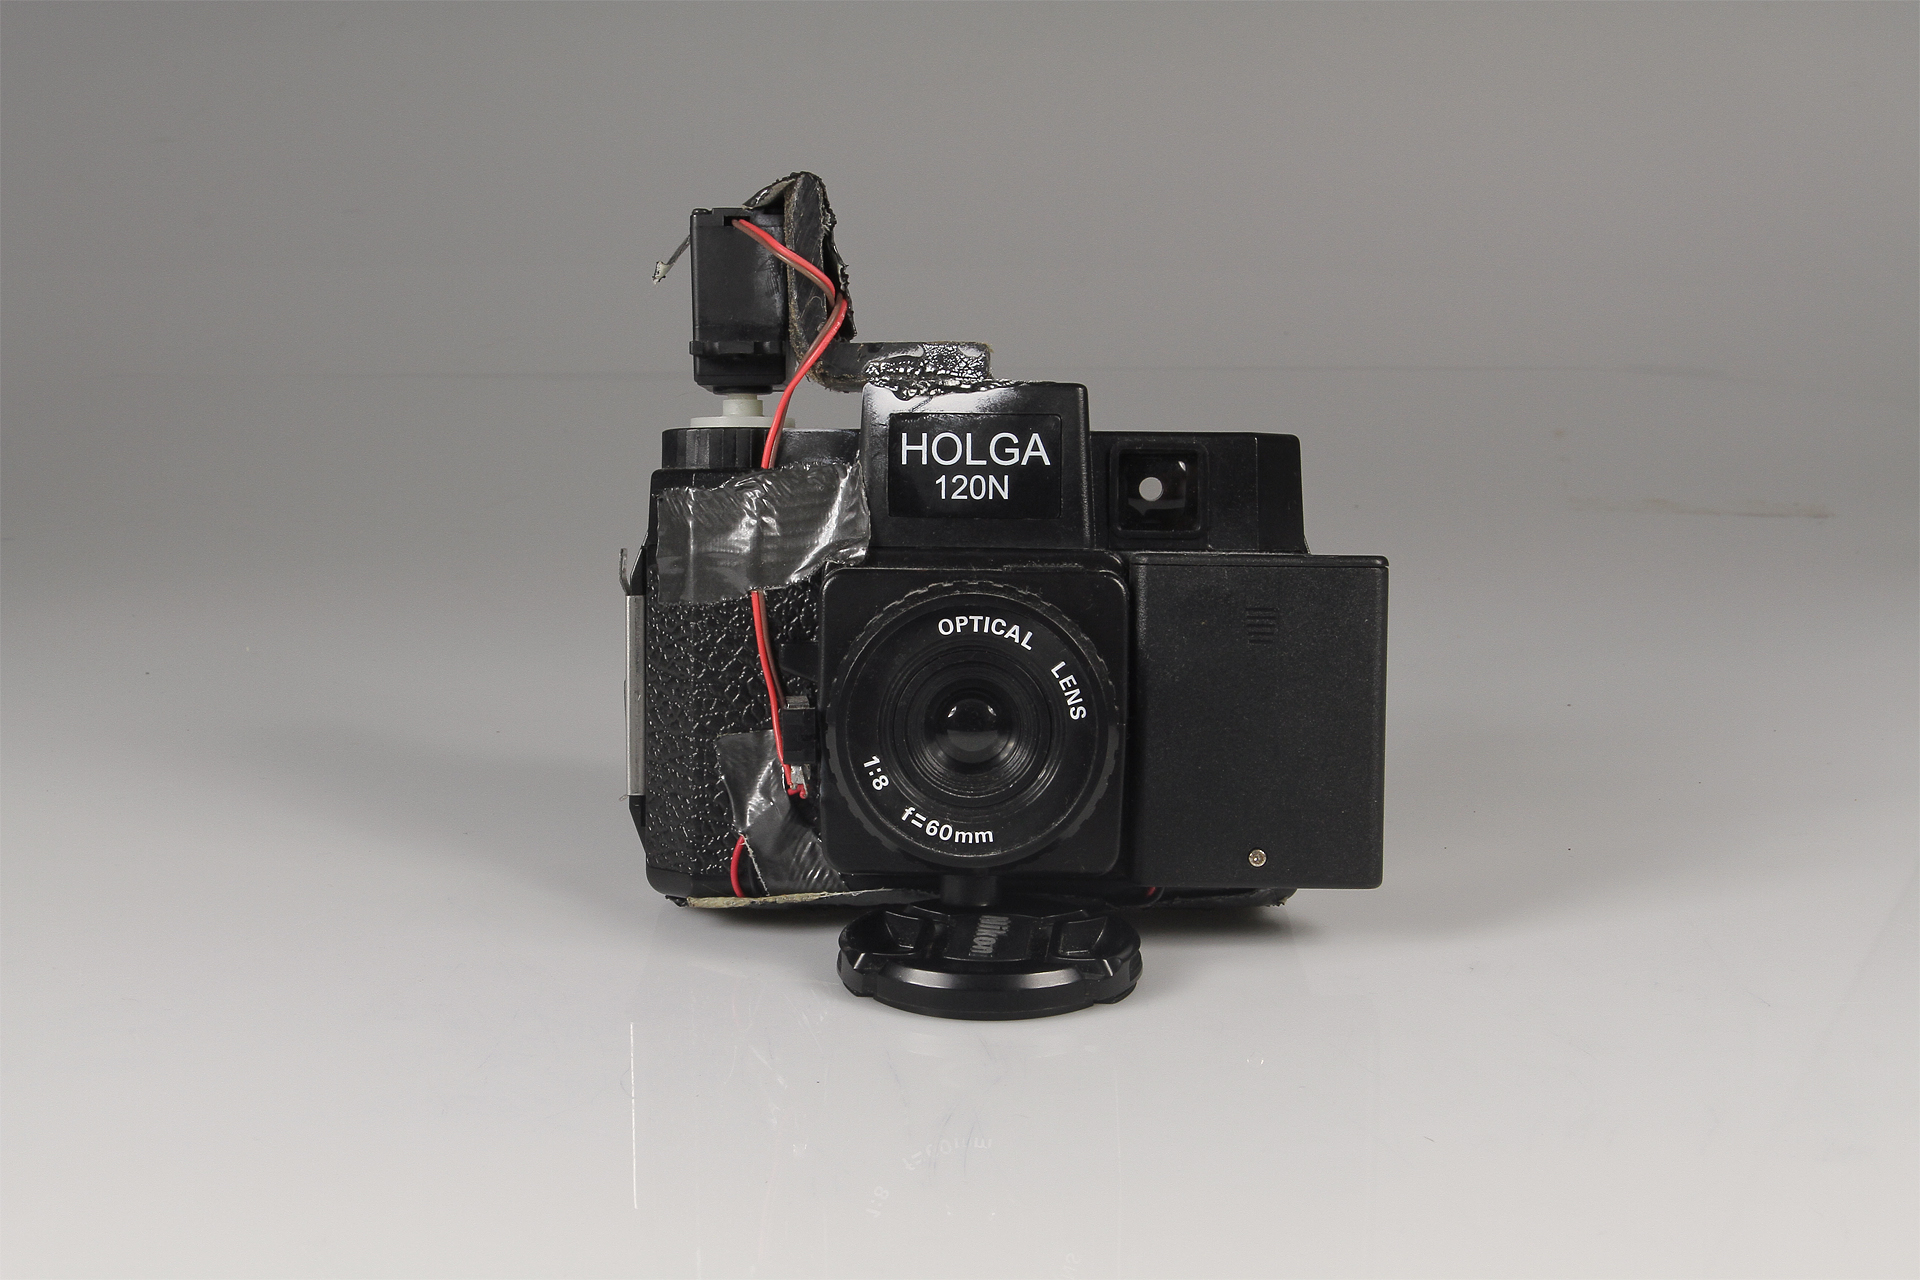   Holga Slitscan Camera  2013.&nbsp; Modified Holga for Strip Photography.&nbsp; Holga camera, modified servo motor, 3xAAA battery pack, SPST switch, plastic L bracket, black-rubberized 4x5 film (to make the slit in the camera), electrical wire, duct